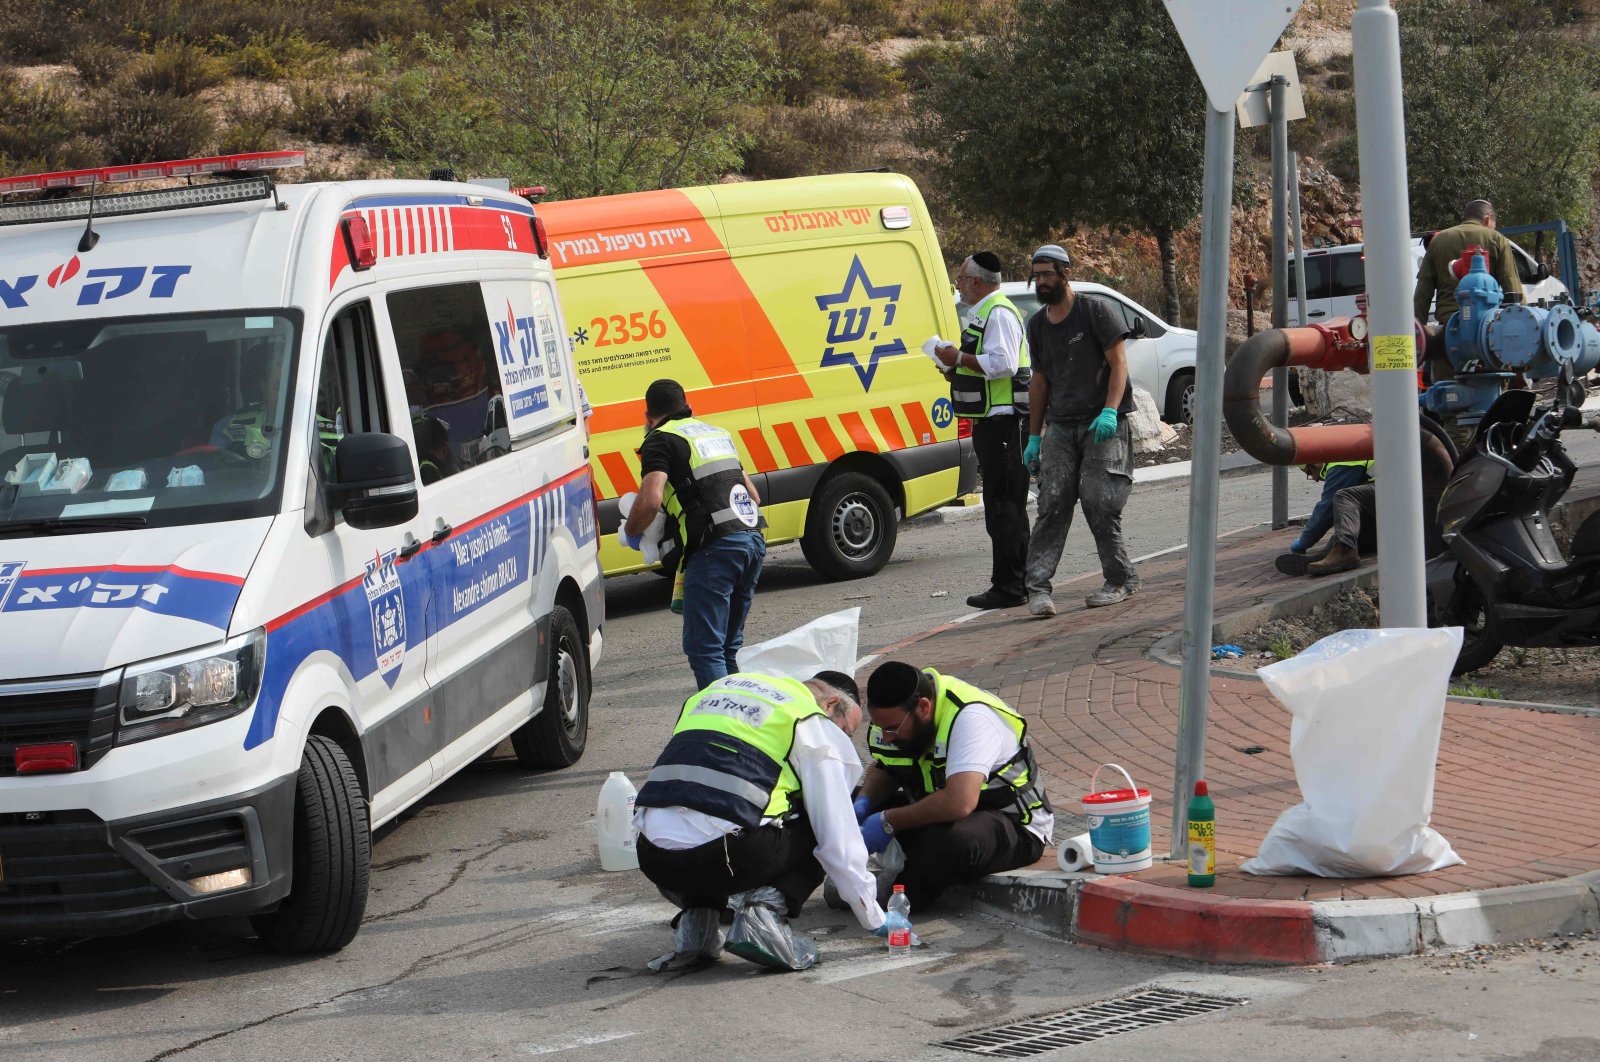 An ultra-Orthodox Jewish emergency response team works at the scene of an attack in the occupied West Bank, Palestine, Nov. 15, 2022. (AFP Photo)